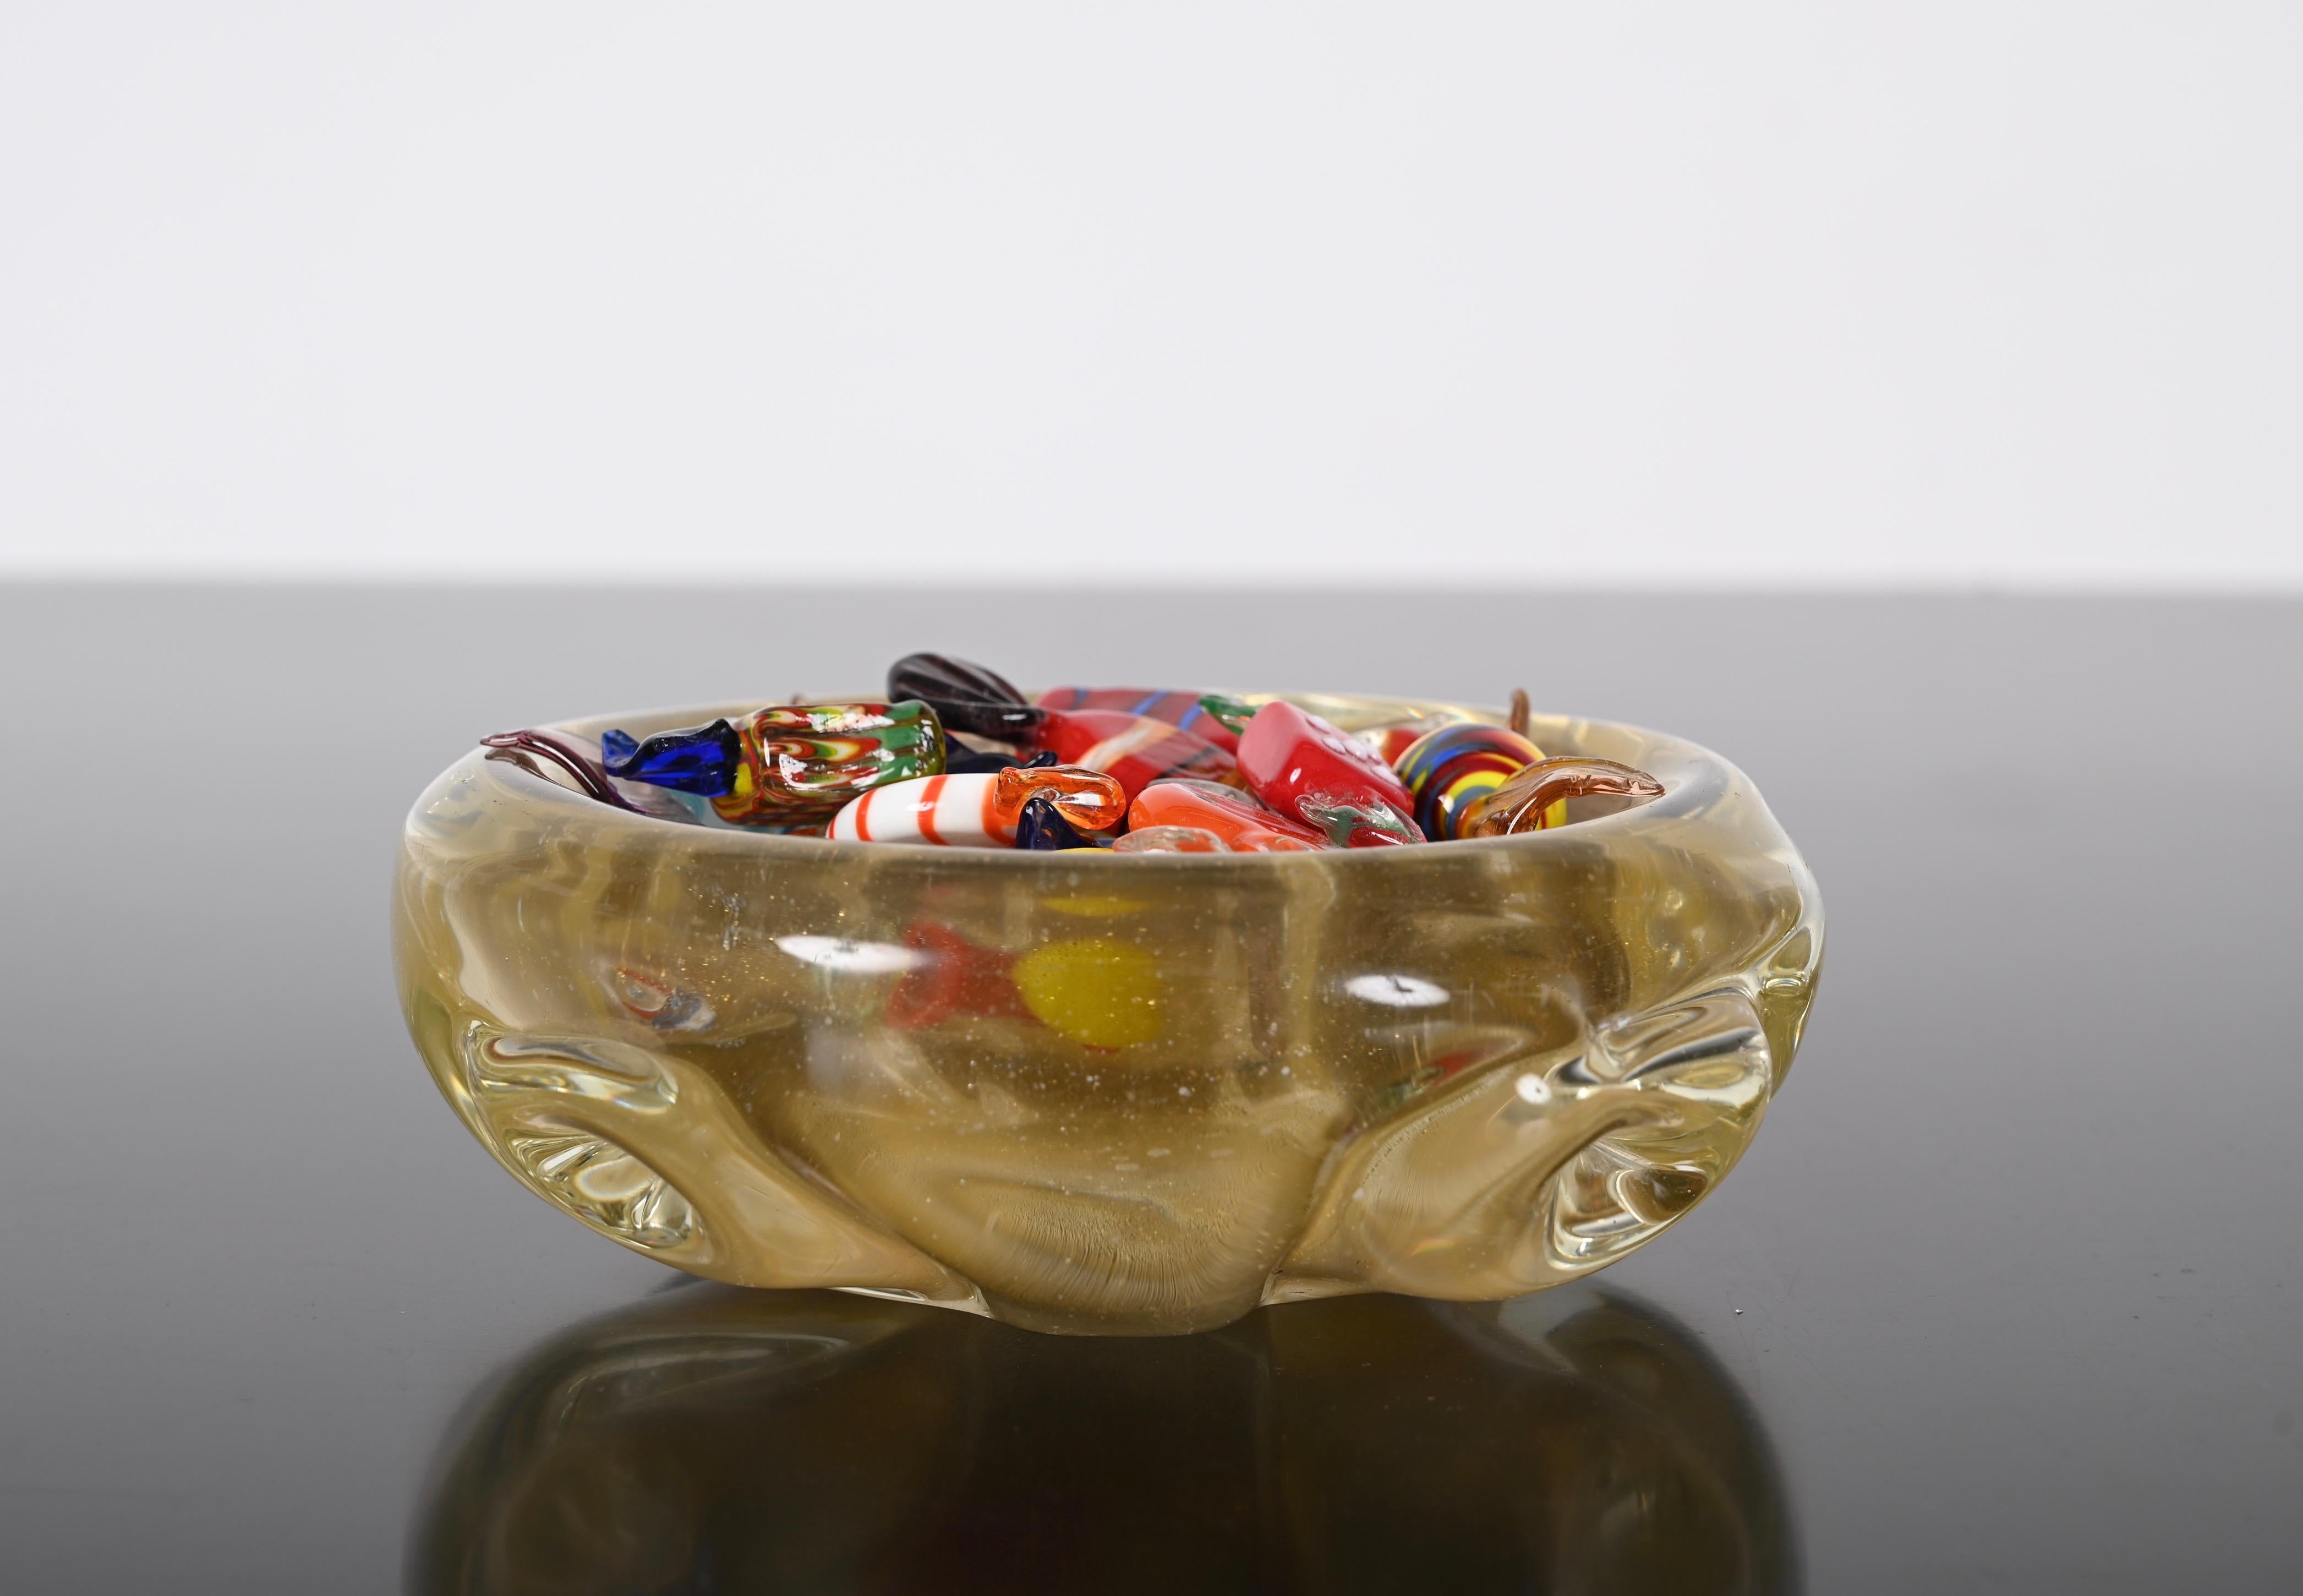 20th Century Archimede Seguso Midcentury Murano Glass Bowl with Gold Dots, Italy, 1960s For Sale